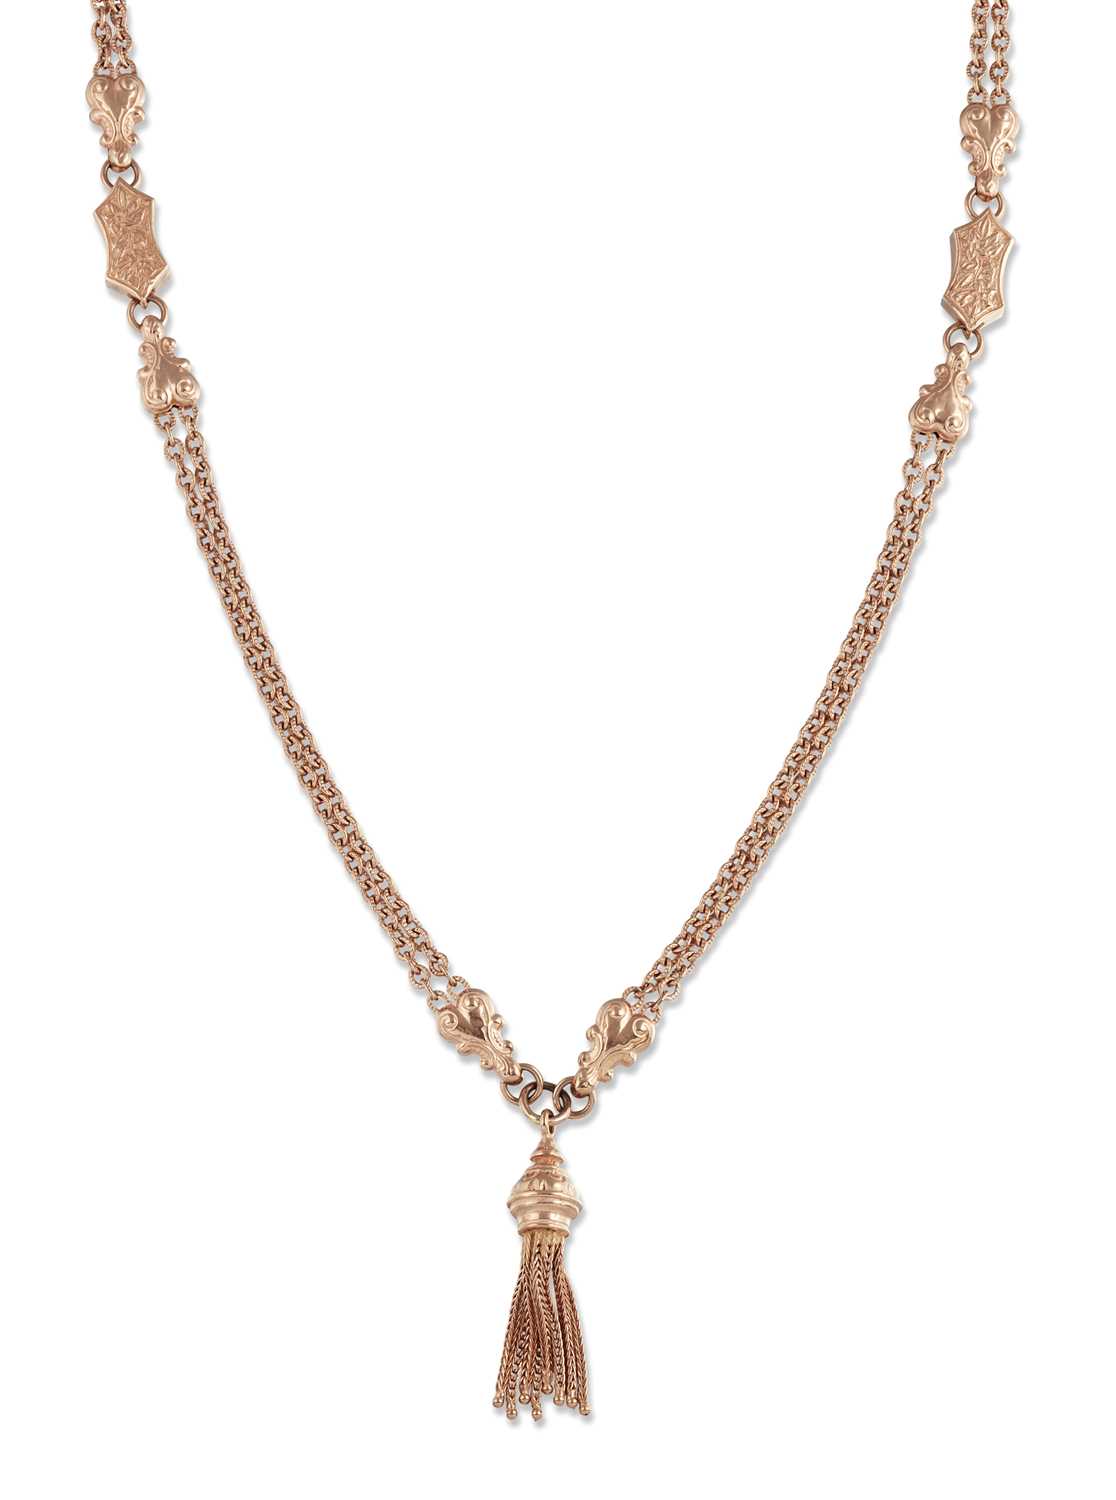 A VICTORIAN STYLE 9 CARAT ROSE GOLD ALBERTINA CHAIN NECKLACE